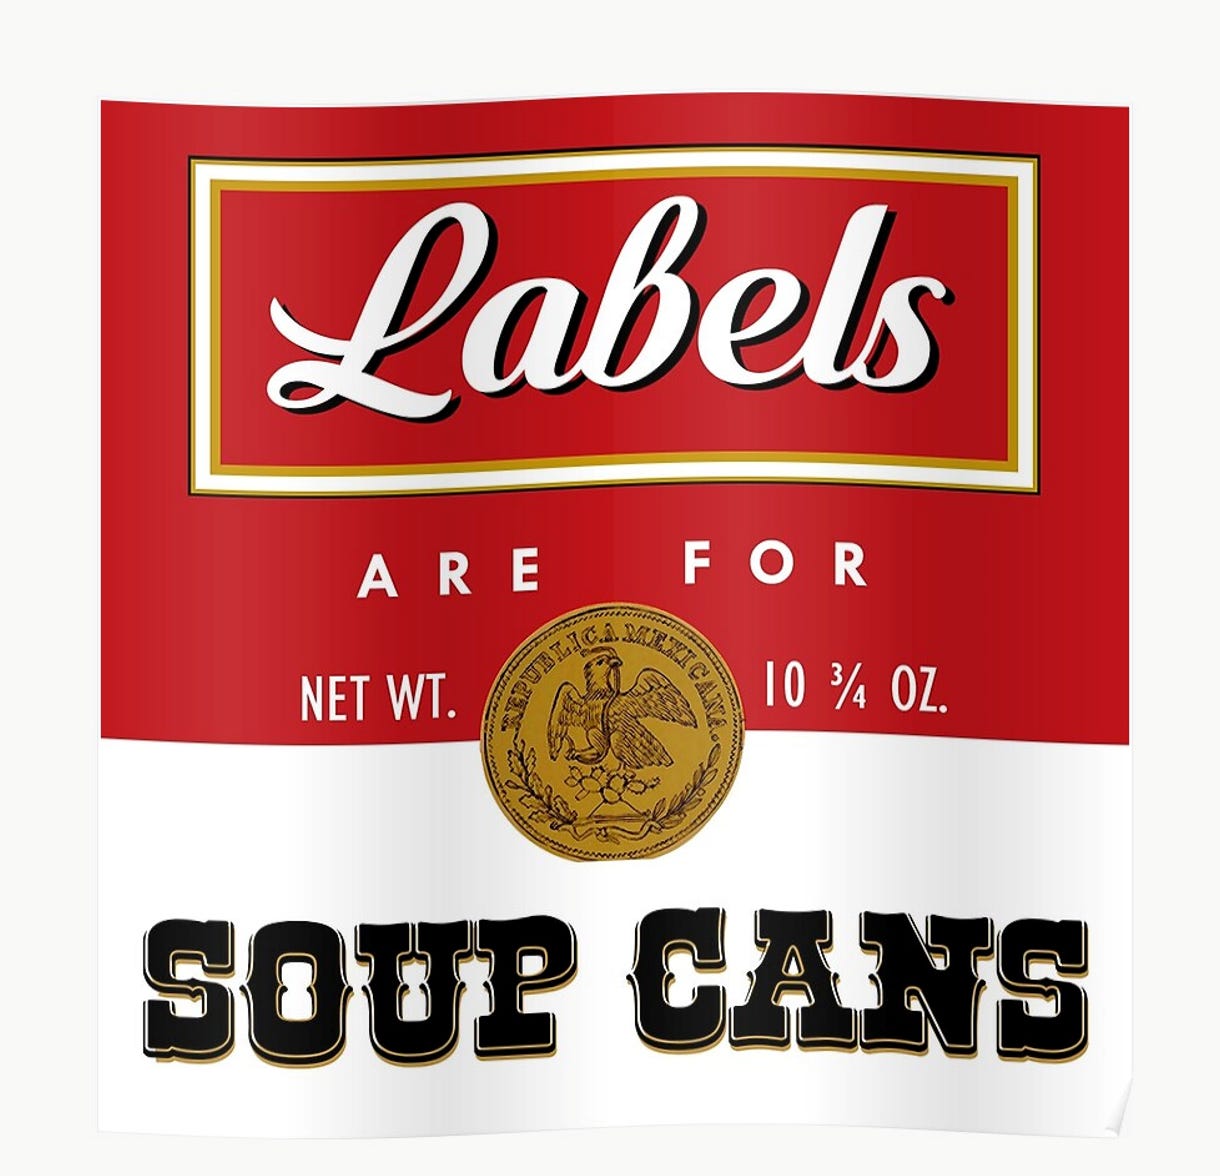 : This image shows the design of an unrolled Campbell’s soup can label, except the text has been replaced by the words “Labels are for soup cans.”